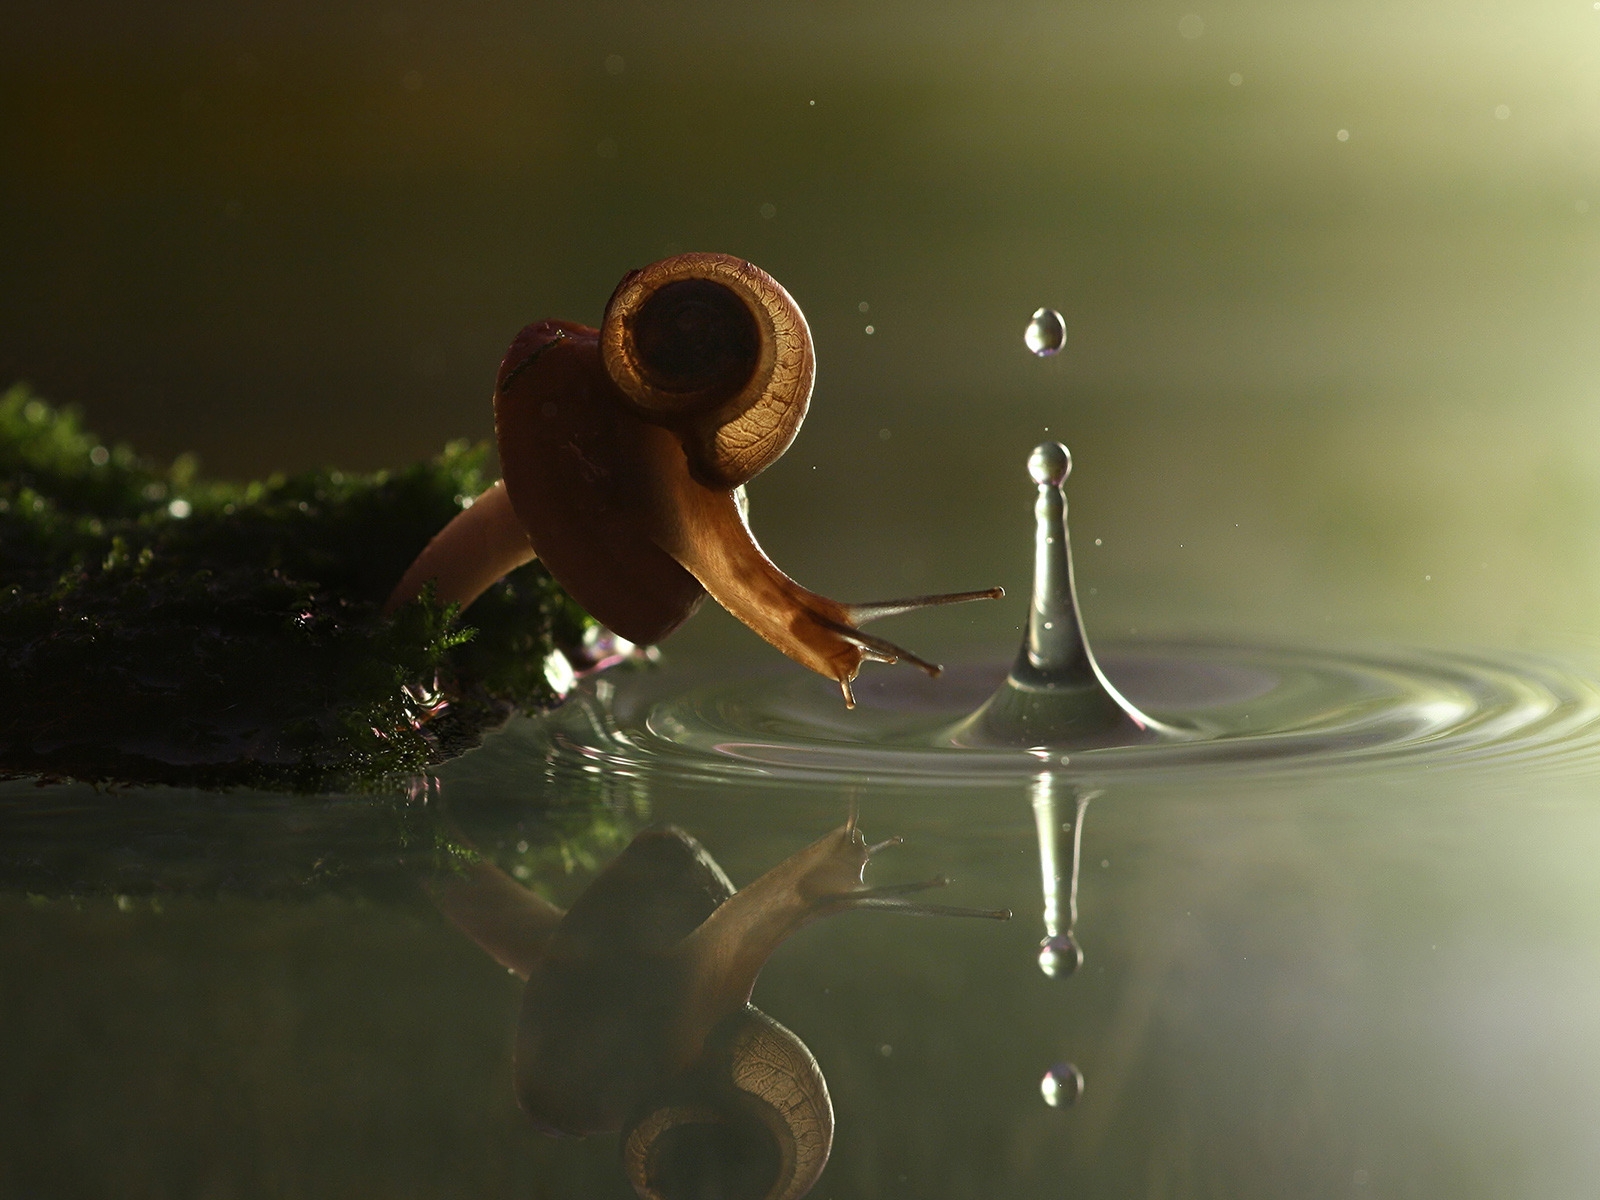 Falling Snail for 1600 x 1200 resolution